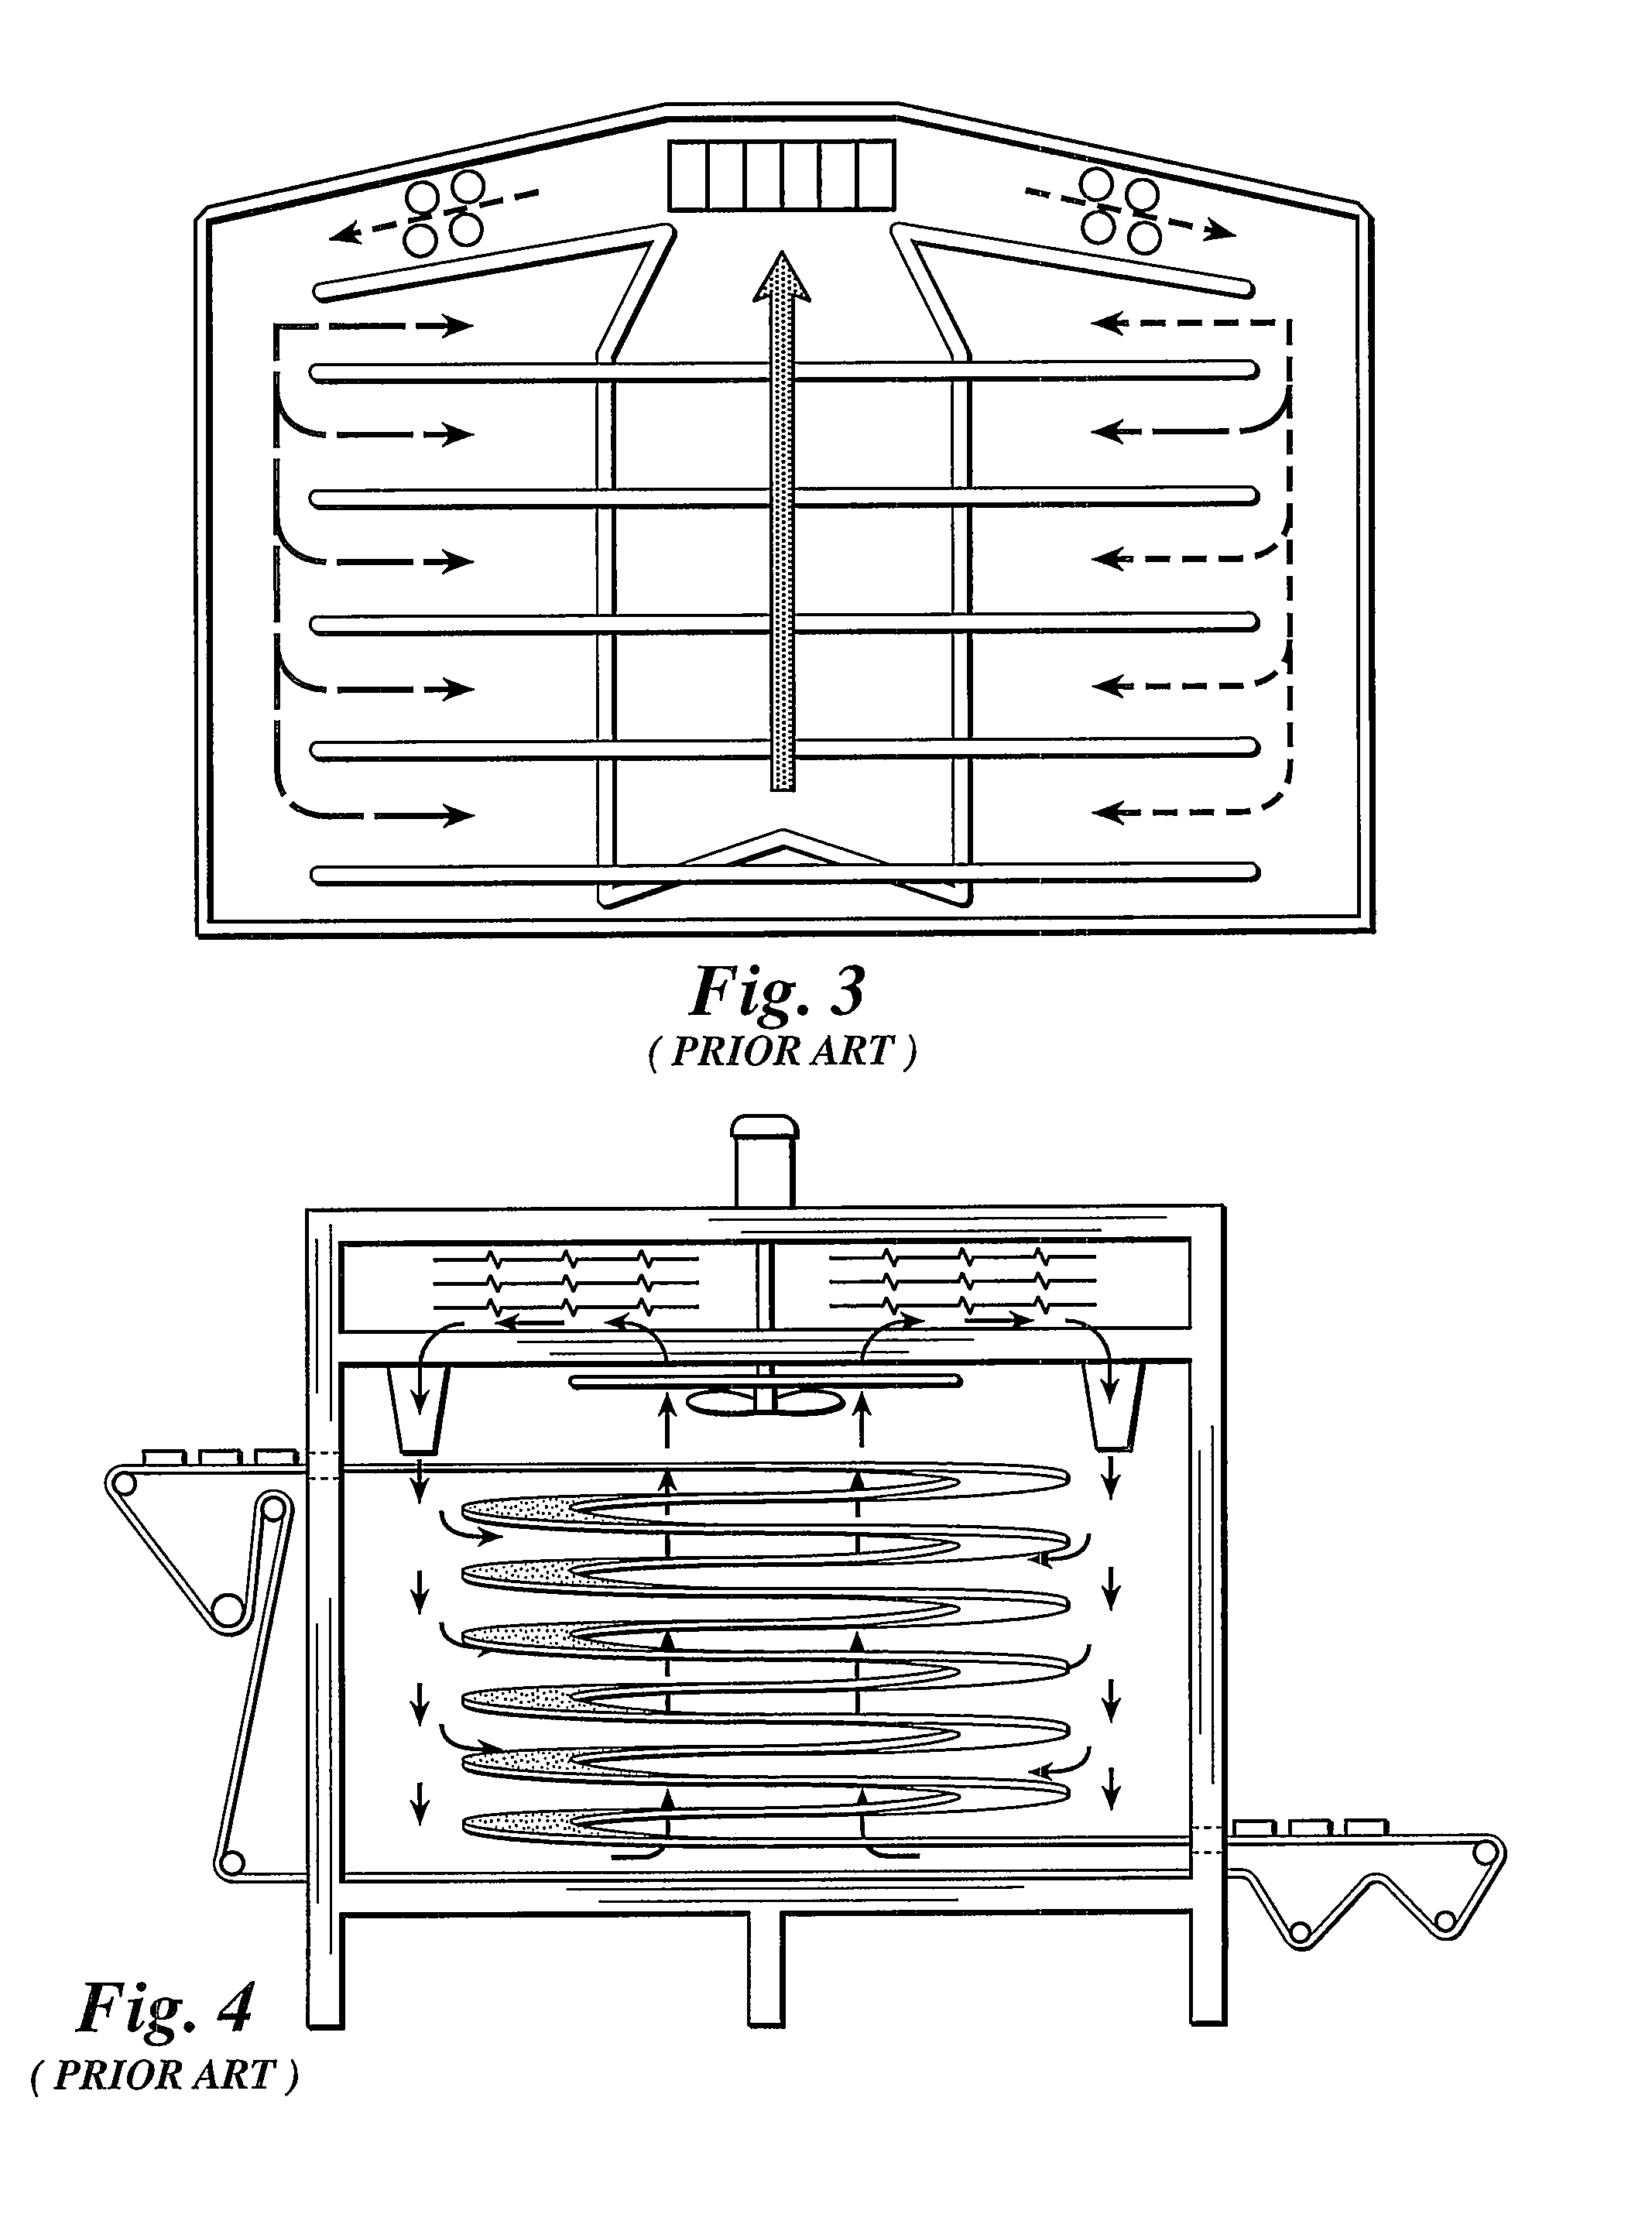 Airflow Pattern for Spiral Ovens